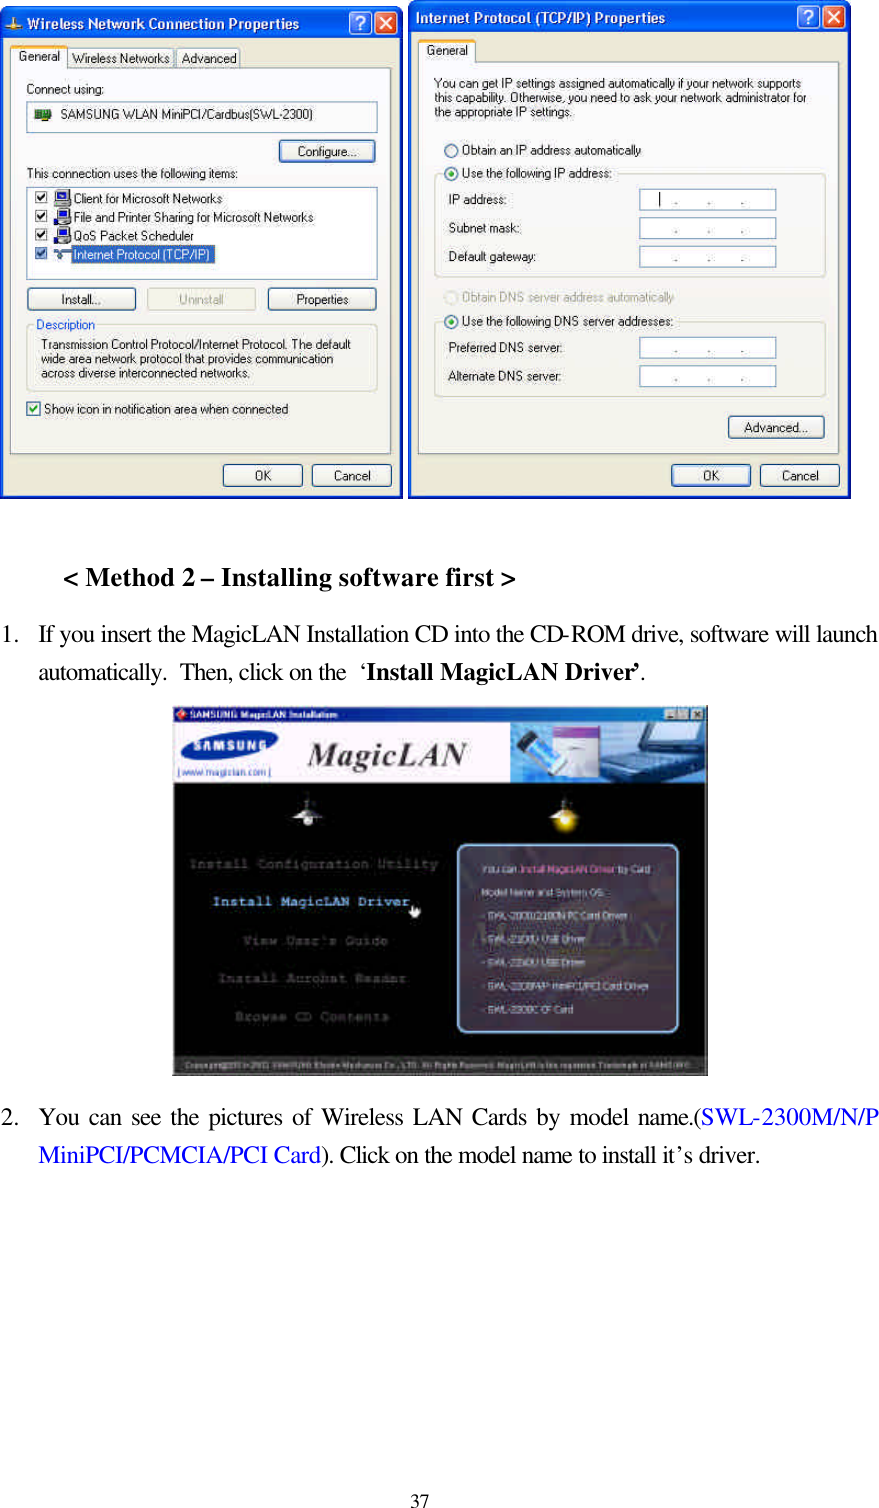  37    &lt; Method 2 – Installing software first &gt; 1.  If you insert the MagicLAN Installation CD into the CD-ROM drive, software will launch automatically.  Then, click on the  ‘Install MagicLAN Driver’.  2.  You can see the pictures of Wireless LAN Cards by model name.(SWL-2300M/N/P MiniPCI/PCMCIA/PCI Card). Click on the model name to install it’s driver. 